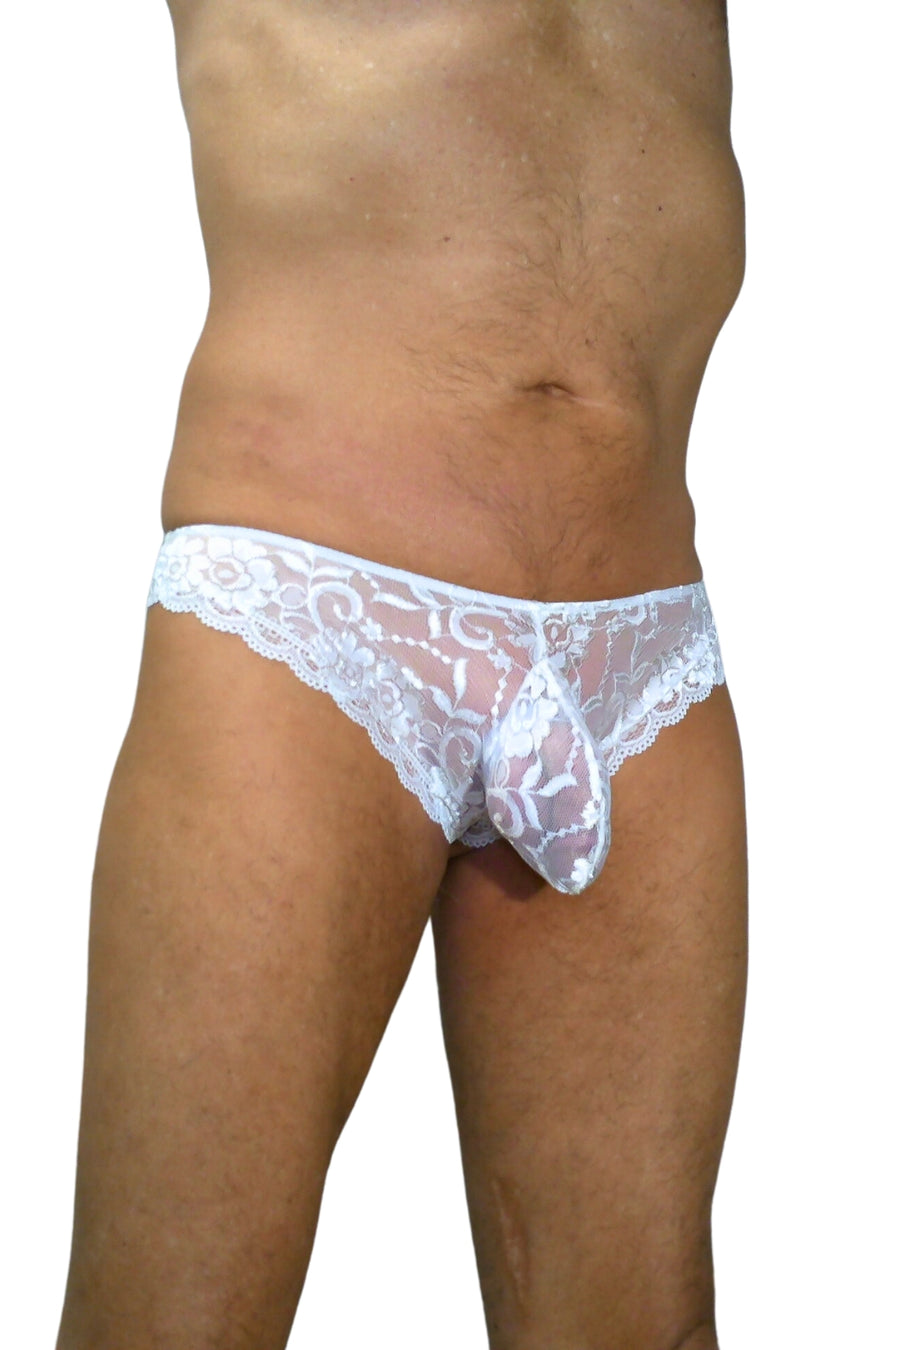 White Lace Brief with a Brazillain cut back and a generous pouch designed for your genitals. Low rise design and see through.